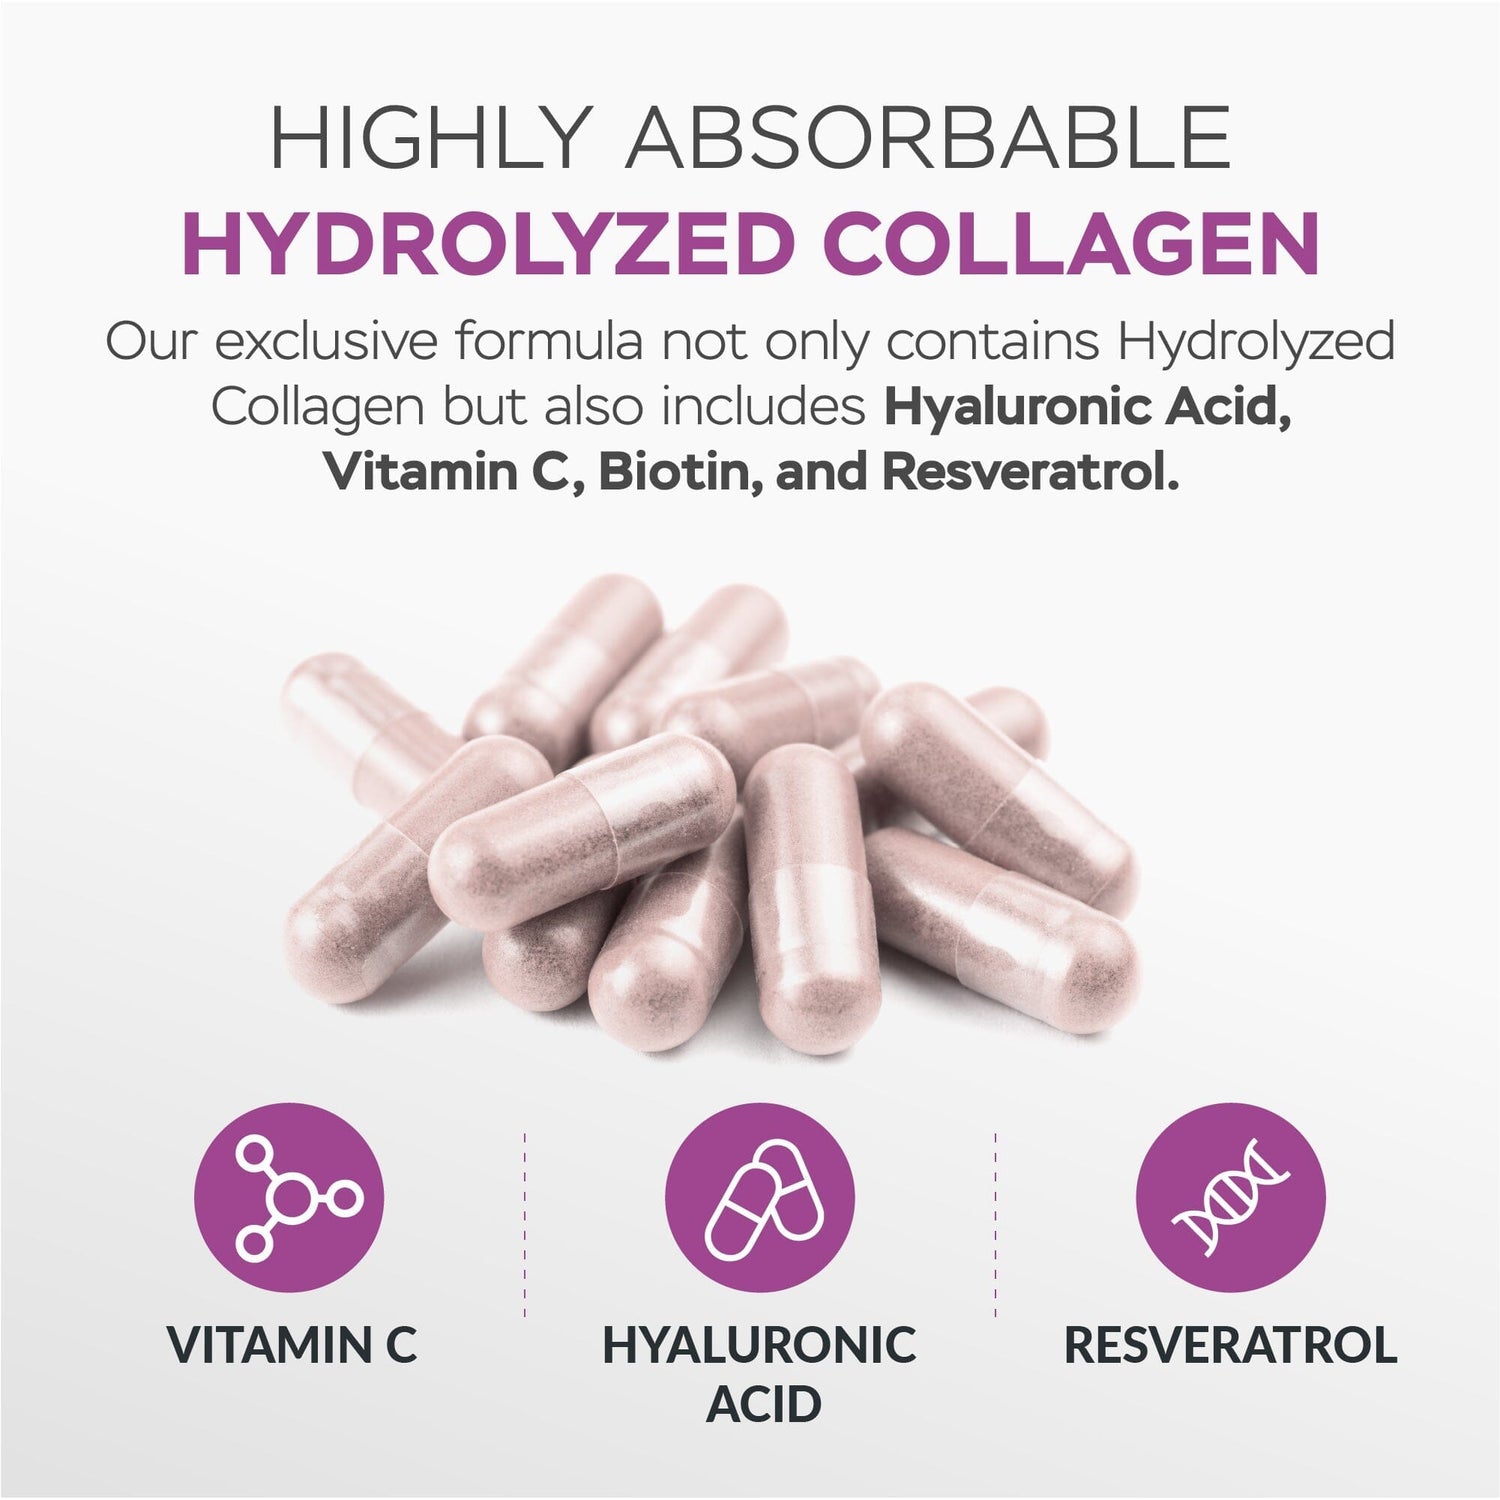 Combo Hydrolyzed Collagen With Resveratrol Coconut Flavor And Unflavored + Hydrolized Collagen Capsules